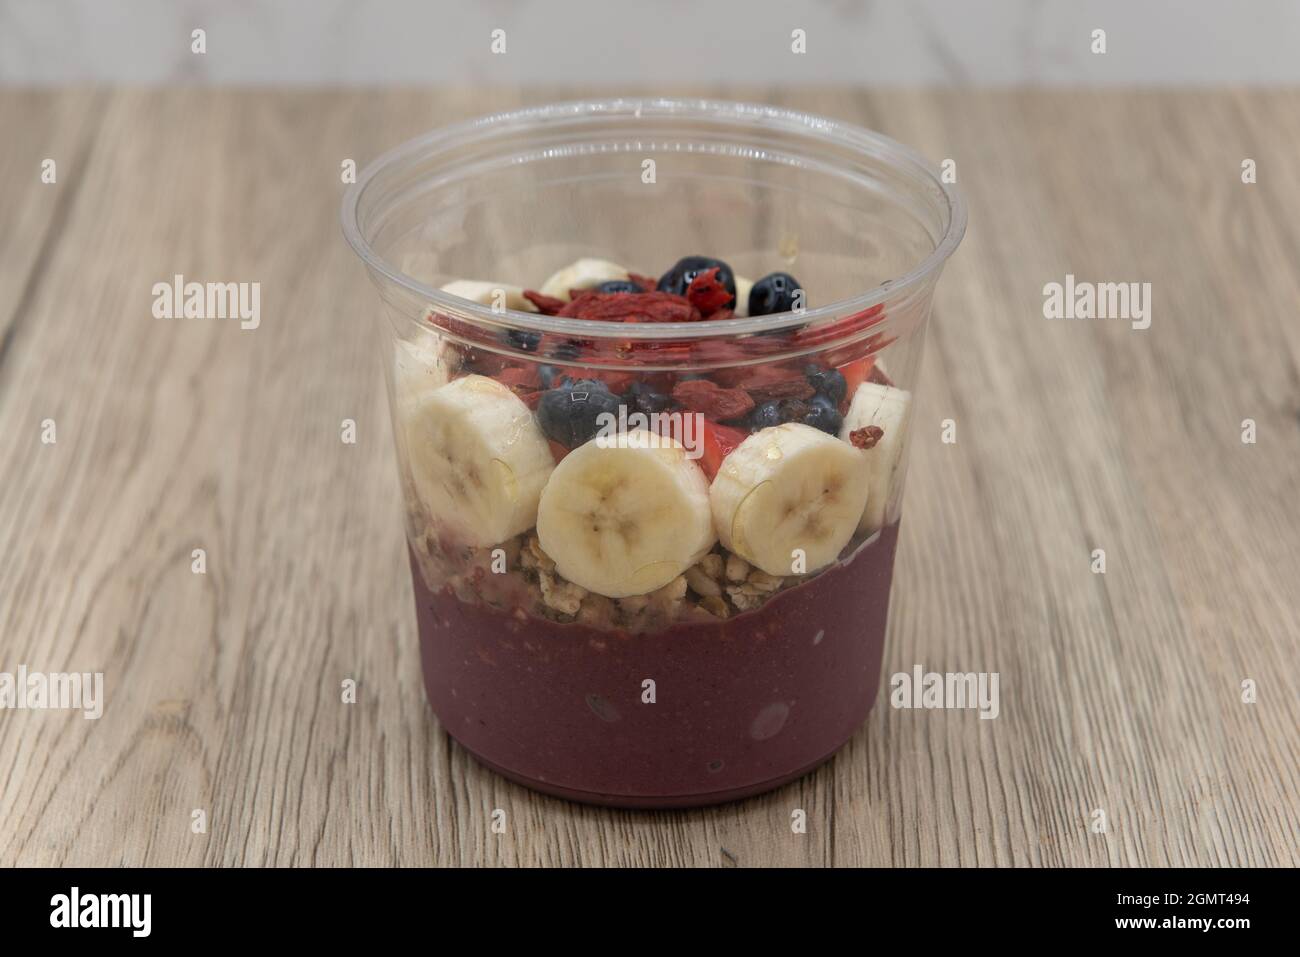 Acai fruit bowl blueberries, strawberry, and goji berry with blended flavors to increase your immunity and better nutrition. Stock Photo